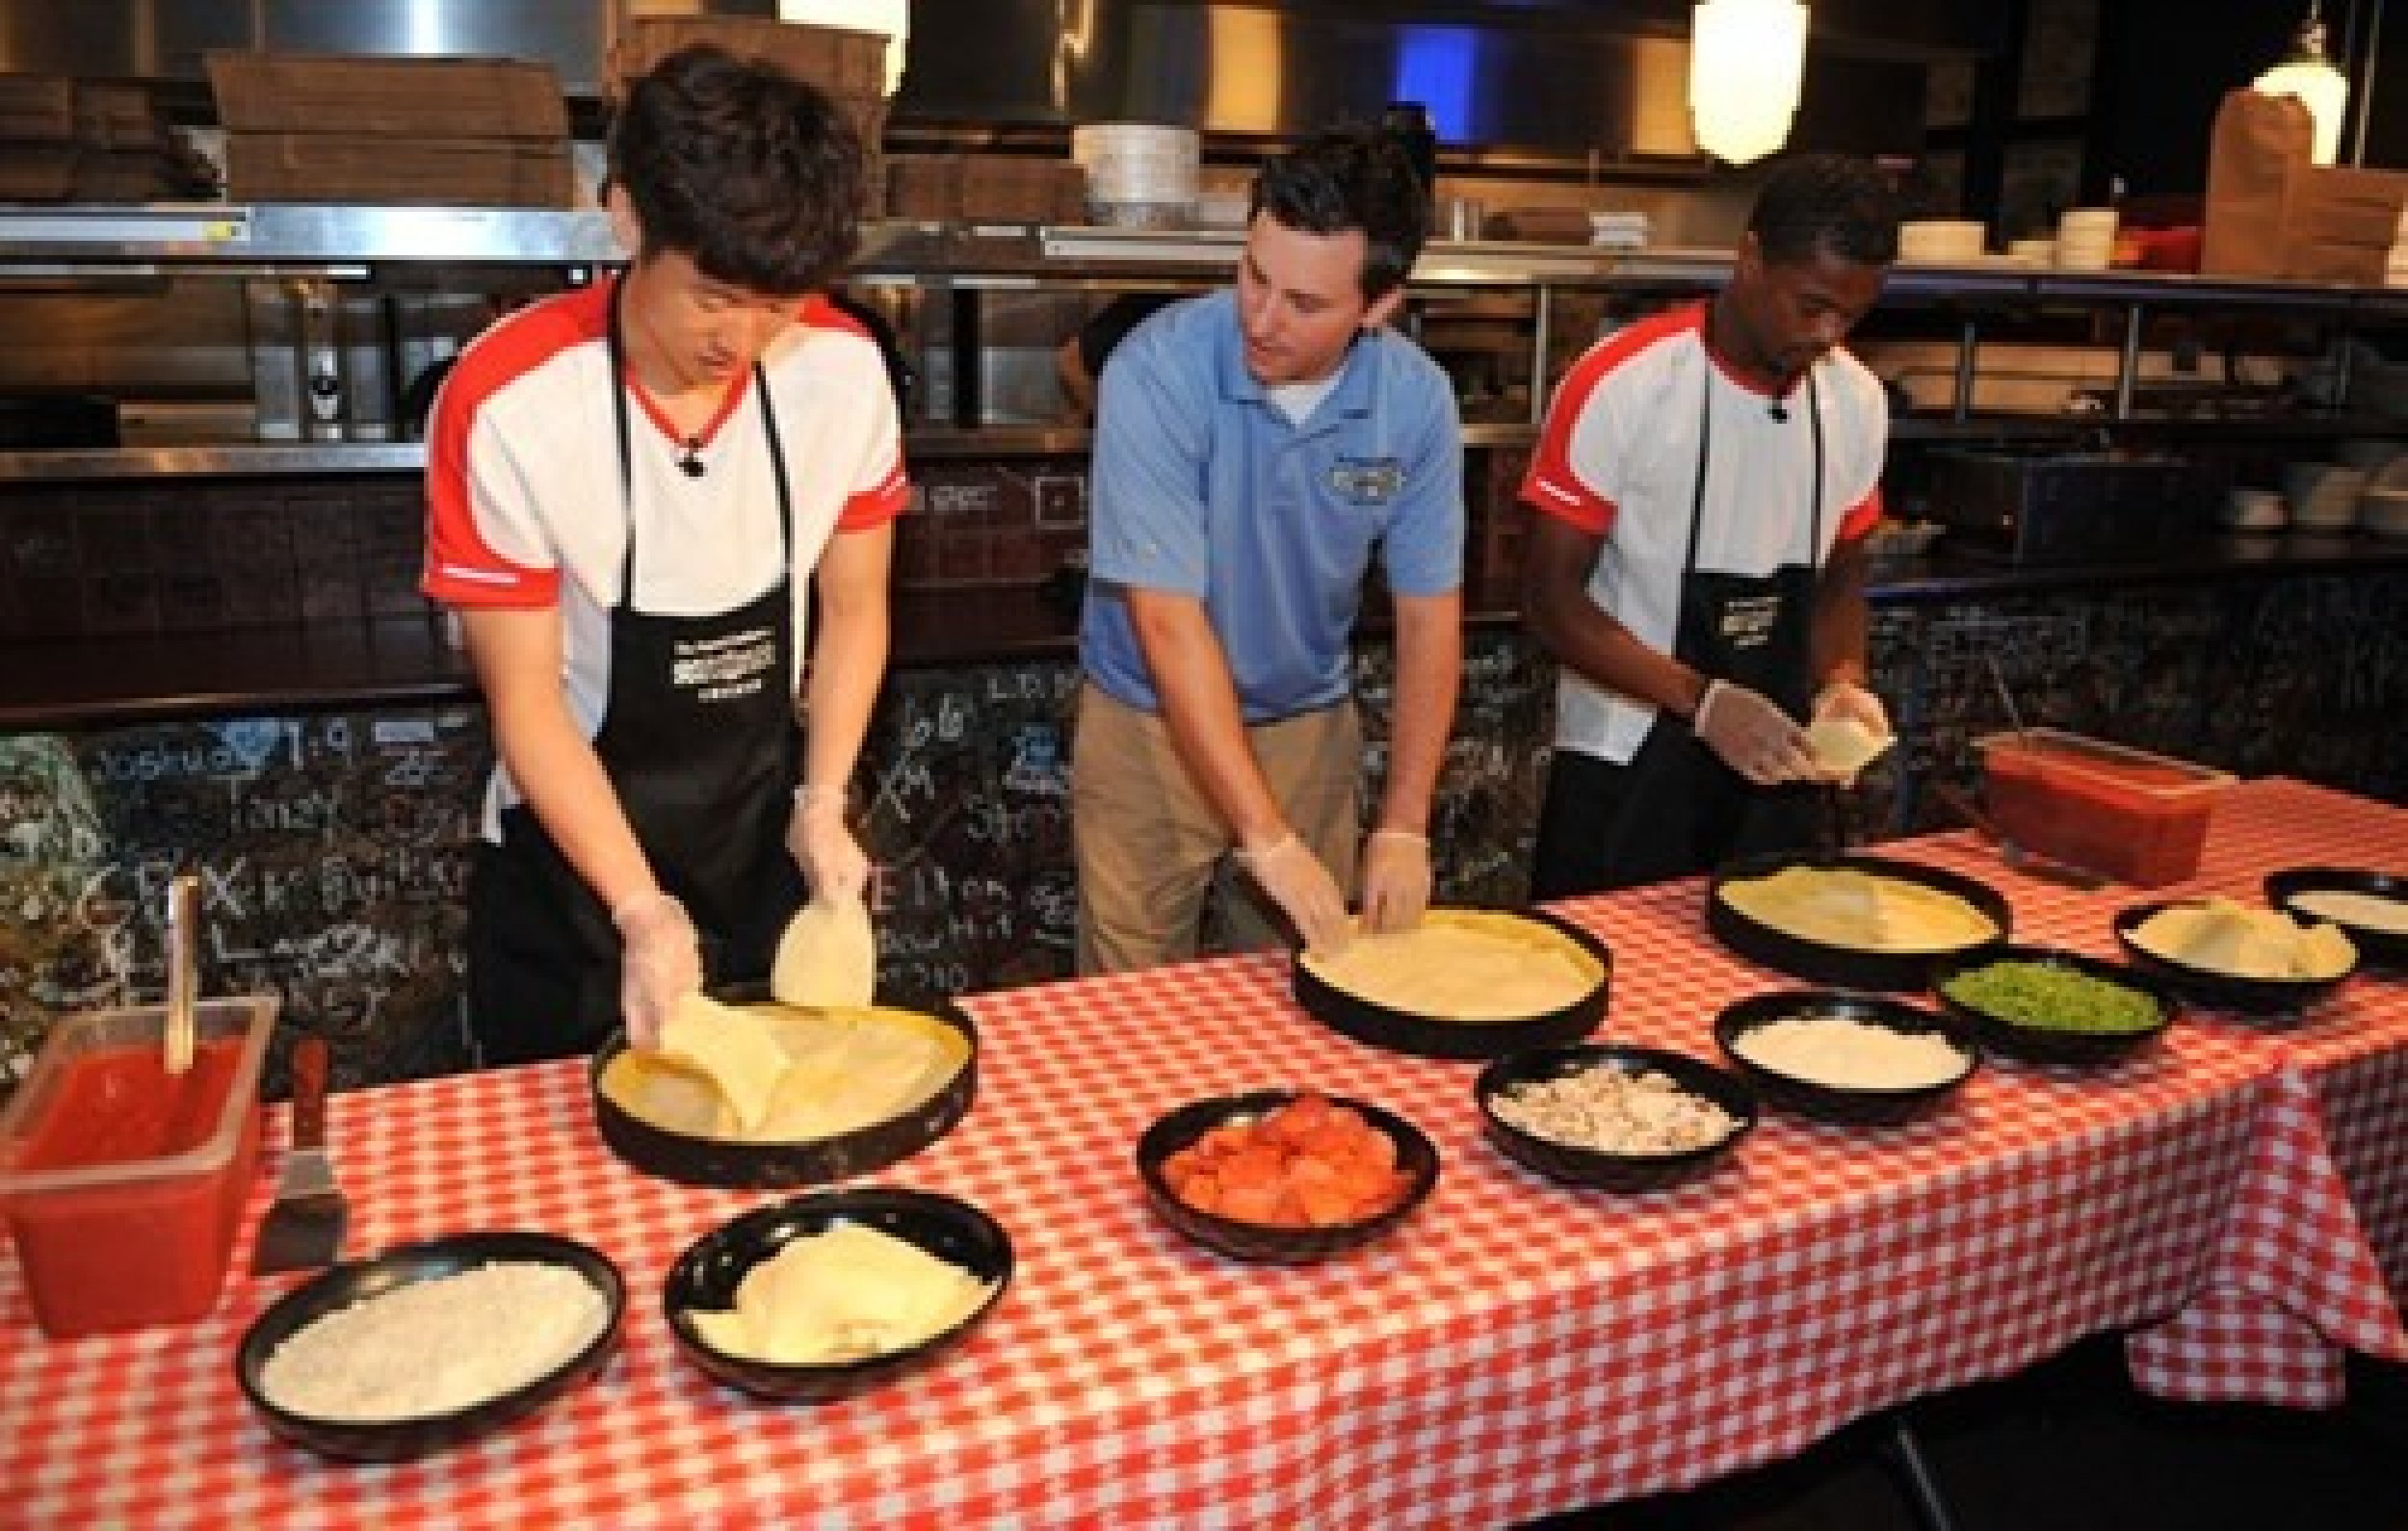 Evra and Park try to learn the art of cooking.